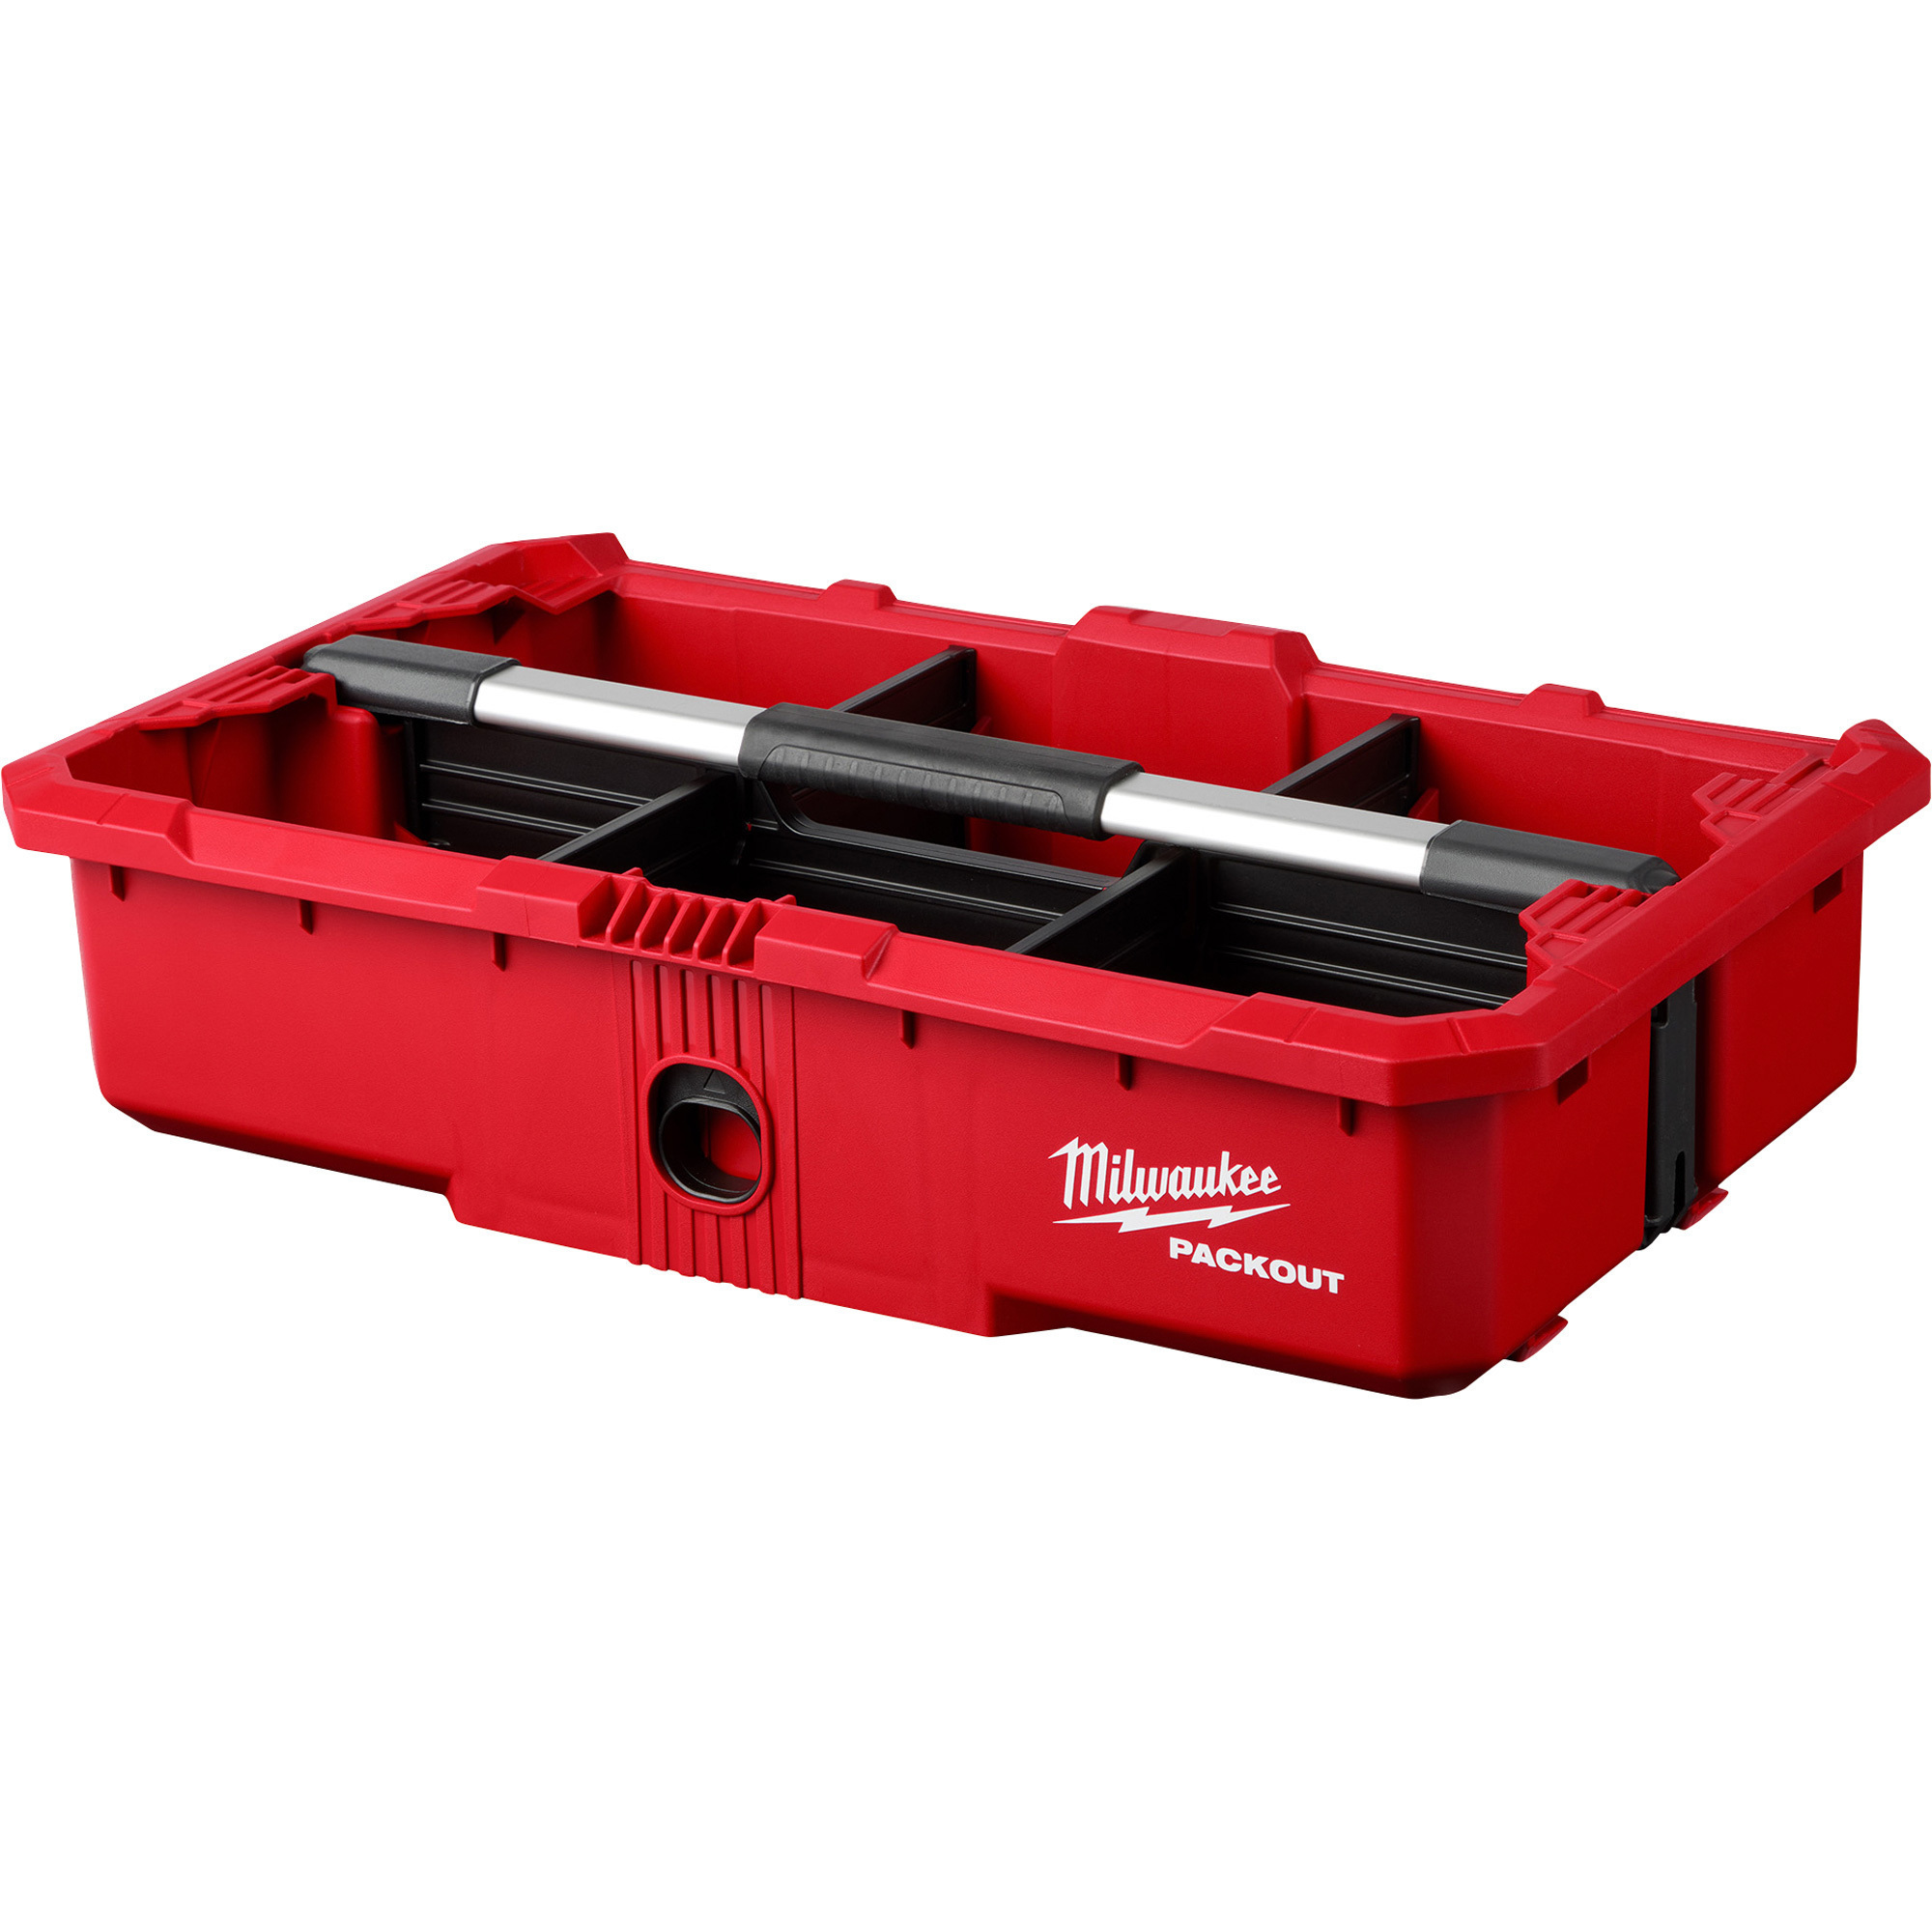 Milwaukee Packout Tool Tray, Model 48-22-8045